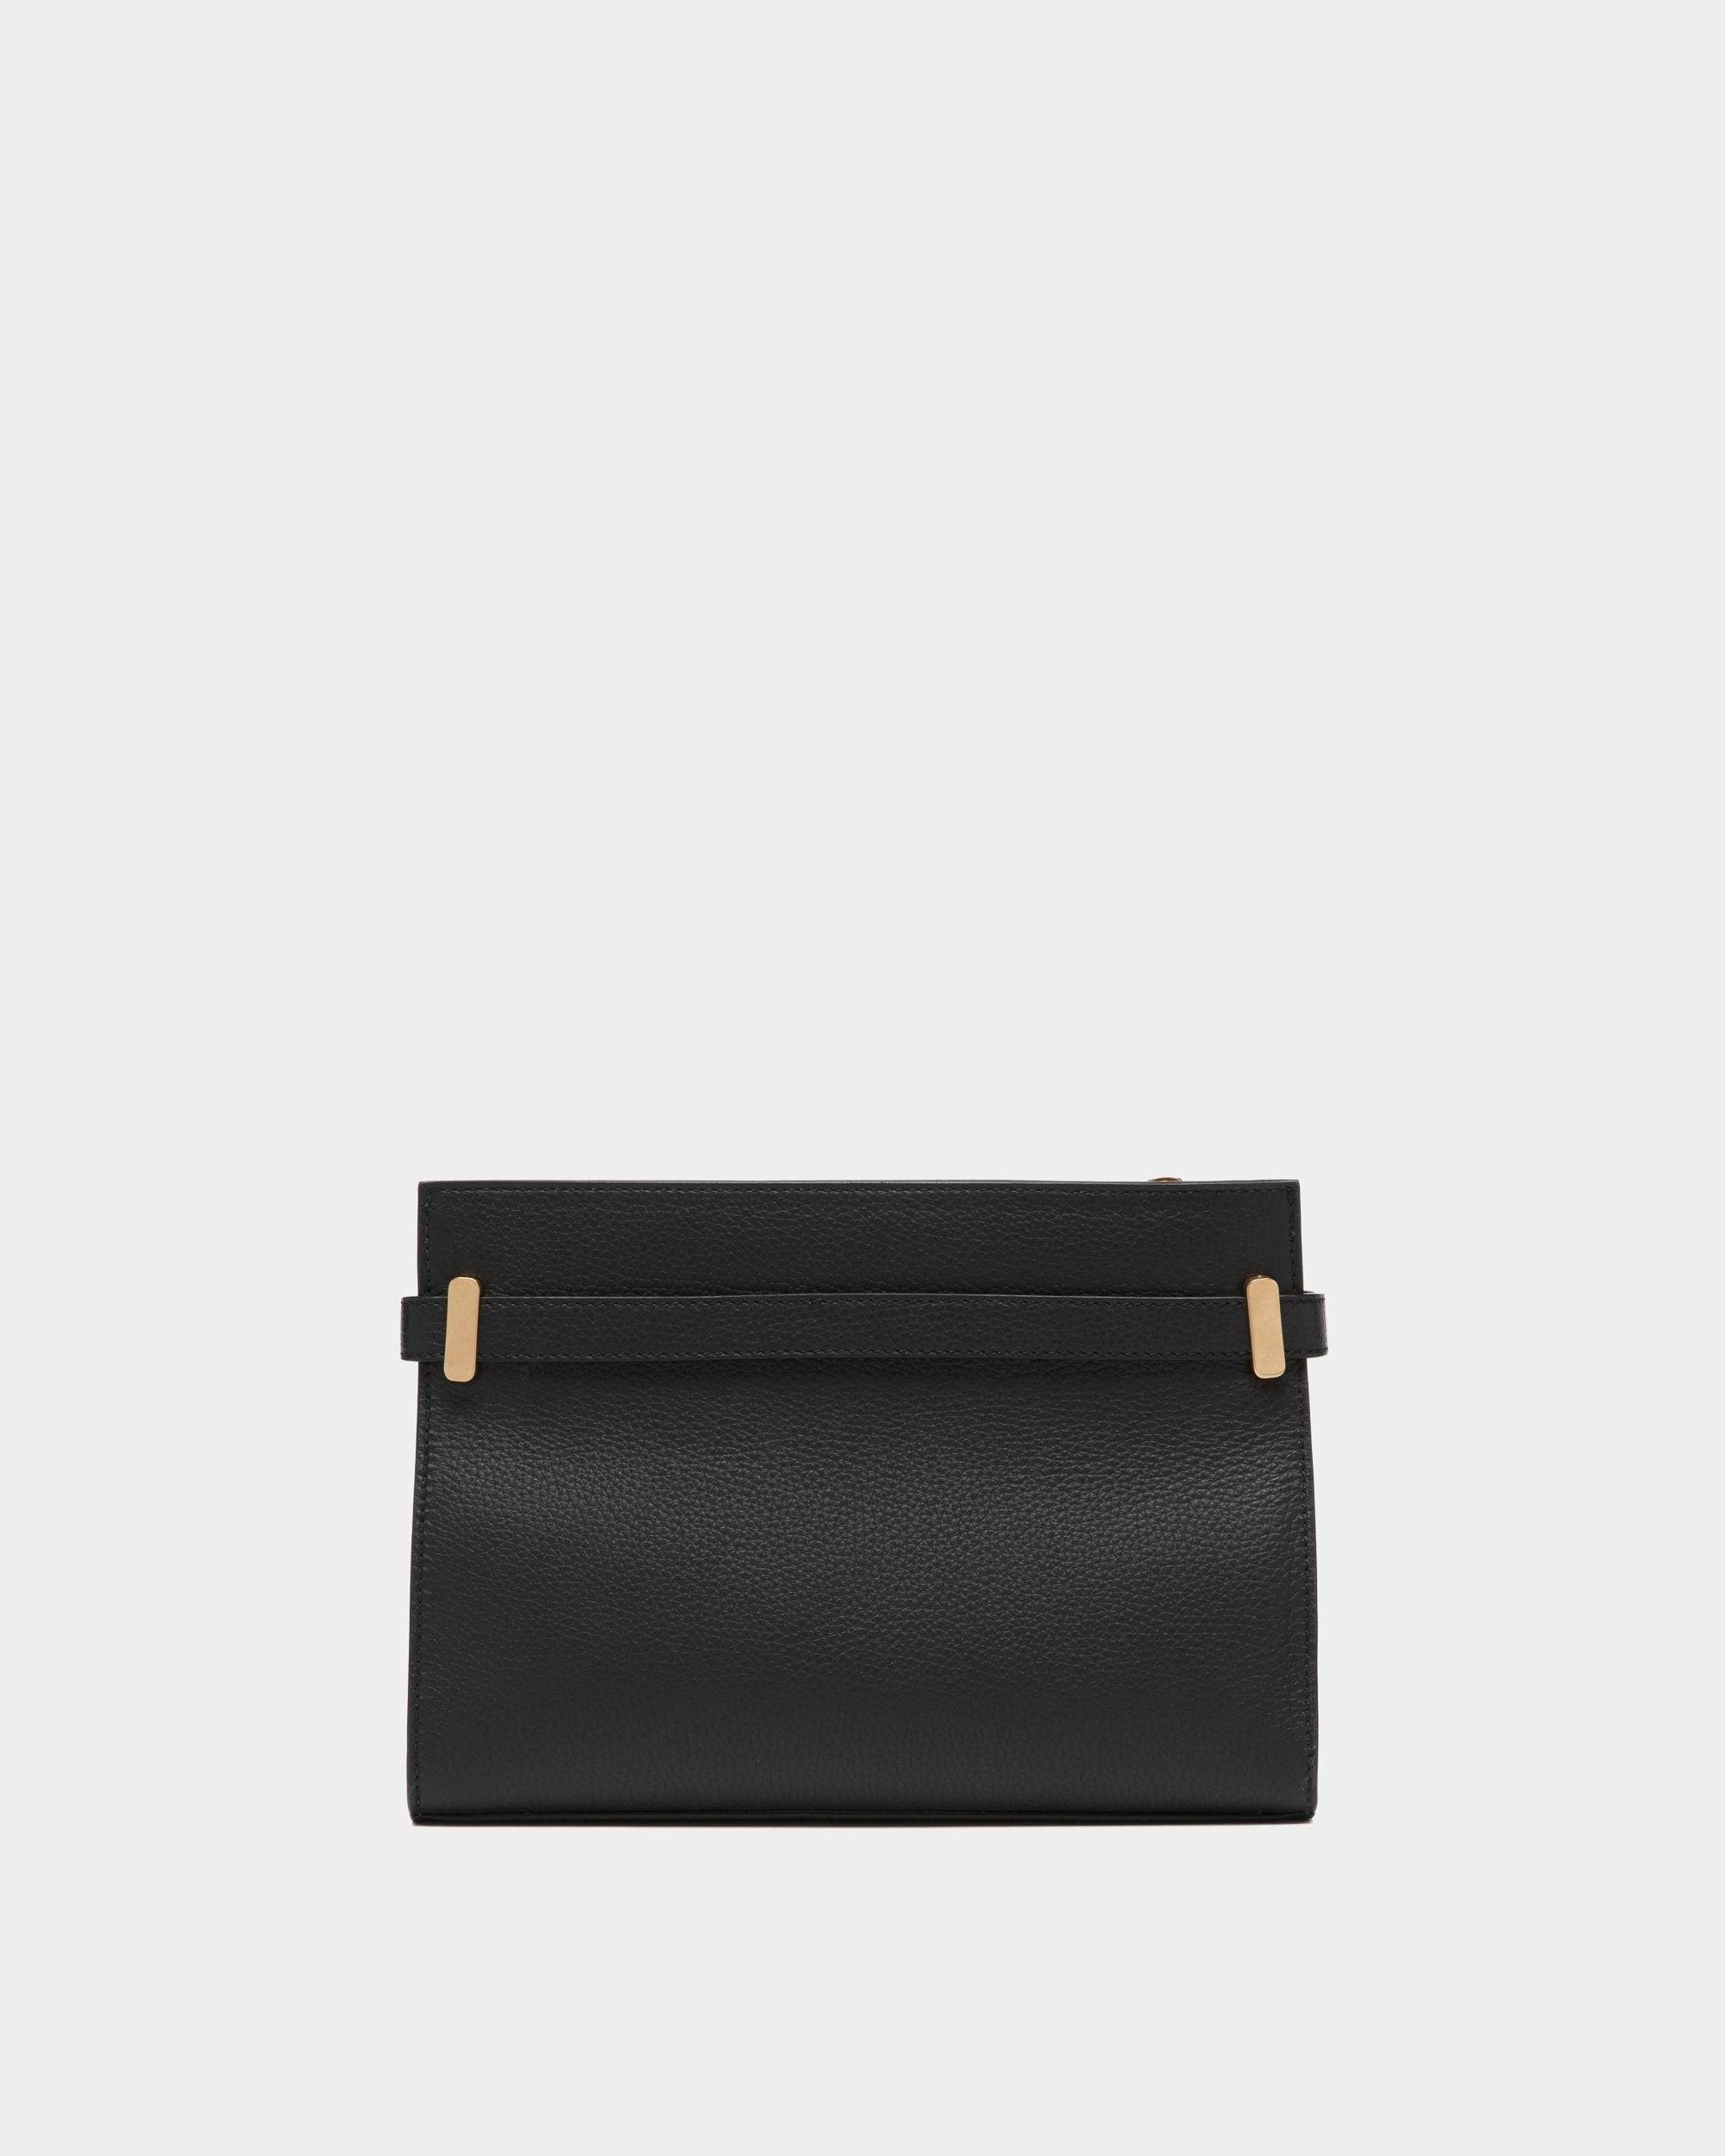 Carriage | Women's Shoulder Bag in Black Grained Leather | Bally | Still Life Back